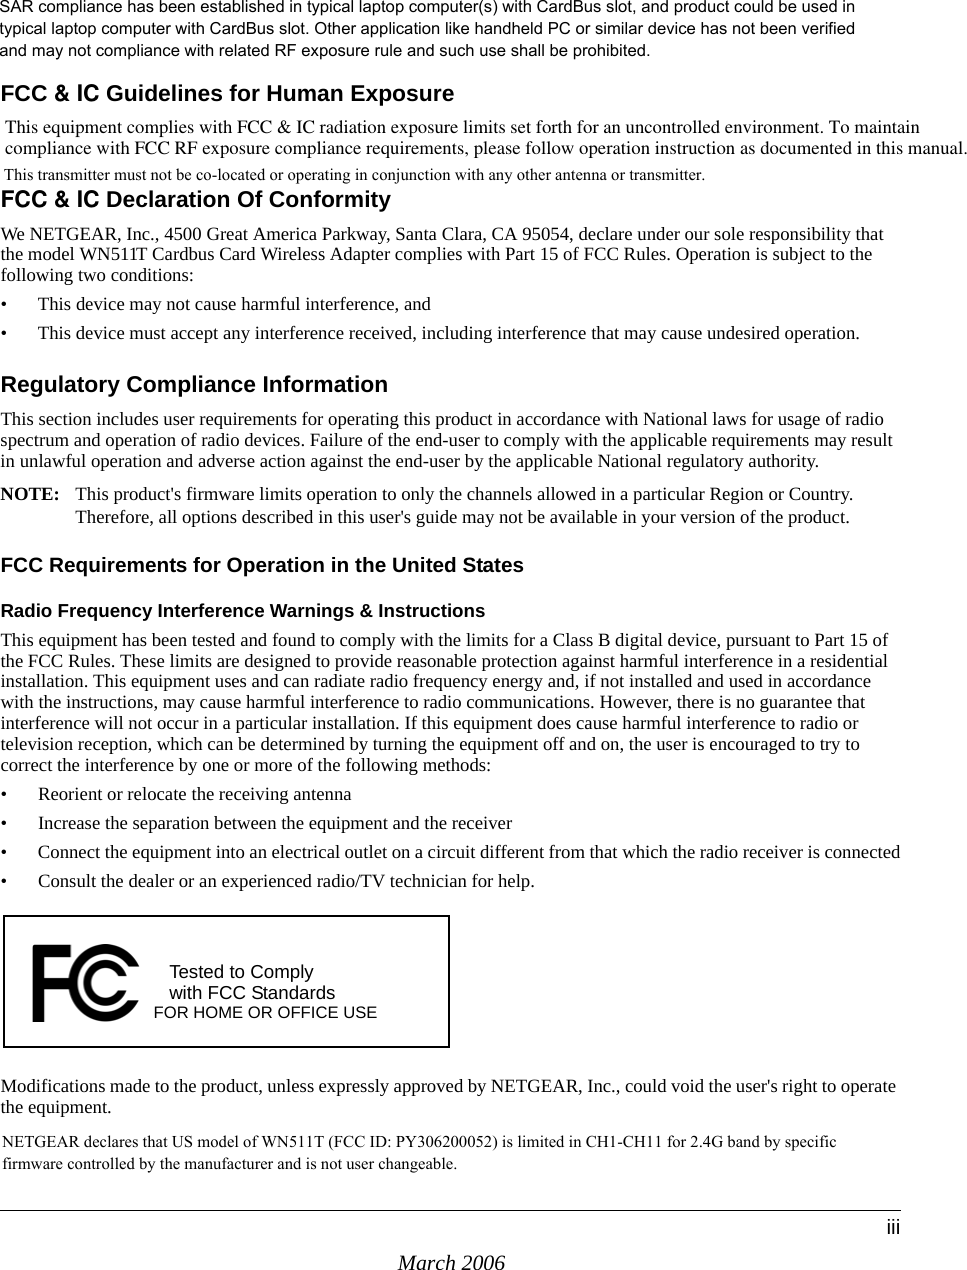 March 2006iiiFCC &amp; IC Guidelines for Human ExposureThis equipment complies with FCC &amp; IC radiation exposure limits set forth for an uncontrolled environment. To maintain  compliance with FCC RF exposure compliance requirements, please follow operation instruction as documented in this manual.FCC &amp; IC Declaration Of Conformity We NETGEAR, Inc., 4500 Great America Parkway, Santa Clara, CA 95054, declare under our sole responsibility that the model WN511T Cardbus Card Wireless Adapter complies with Part 15 of FCC Rules. Operation is subject to the following two conditions:• This device may not cause harmful interference, and• This device must accept any interference received, including interference that may cause undesired operation.Regulatory Compliance InformationThis section includes user requirements for operating this product in accordance with National laws for usage of radio spectrum and operation of radio devices. Failure of the end-user to comply with the applicable requirements may result in unlawful operation and adverse action against the end-user by the applicable National regulatory authority.NOTE: This product&apos;s firmware limits operation to only the channels allowed in a particular Region or Country.  Therefore, all options described in this user&apos;s guide may not be available in your version of the product.FCC Requirements for Operation in the United States Radio Frequency Interference Warnings &amp; InstructionsThis equipment has been tested and found to comply with the limits for a Class B digital device, pursuant to Part 15 of the FCC Rules. These limits are designed to provide reasonable protection against harmful interference in a residential installation. This equipment uses and can radiate radio frequency energy and, if not installed and used in accordance with the instructions, may cause harmful interference to radio communications. However, there is no guarantee that interference will not occur in a particular installation. If this equipment does cause harmful interference to radio or television reception, which can be determined by turning the equipment off and on, the user is encouraged to try to correct the interference by one or more of the following methods:• Reorient or relocate the receiving antenna • Increase the separation between the equipment and the receiver• Connect the equipment into an electrical outlet on a circuit different from that which the radio receiver is connected• Consult the dealer or an experienced radio/TV technician for help.Modifications made to the product, unless expressly approved by NETGEAR, Inc., could void the user&apos;s right to operate the equipment.FOR HOME OR OFFICE USETested to Complywith FCC Standards This transmitter must not be co-located or operating in conjunction with any other antenna or transmitter.NETGEAR declares that US model of WN511T (FCC ID: PY306200052) is limited in CH1-CH11 for 2.4G band by specific firmware controlled by the manufacturer and is not user changeable. SAR compliance has been established in typical laptop computer(s) with CardBus slot, and product could be used in typical laptop computer with CardBus slot. Other application like handheld PC or similar device has not been verified and may not compliance with related RF exposure rule and such use shall be prohibited.